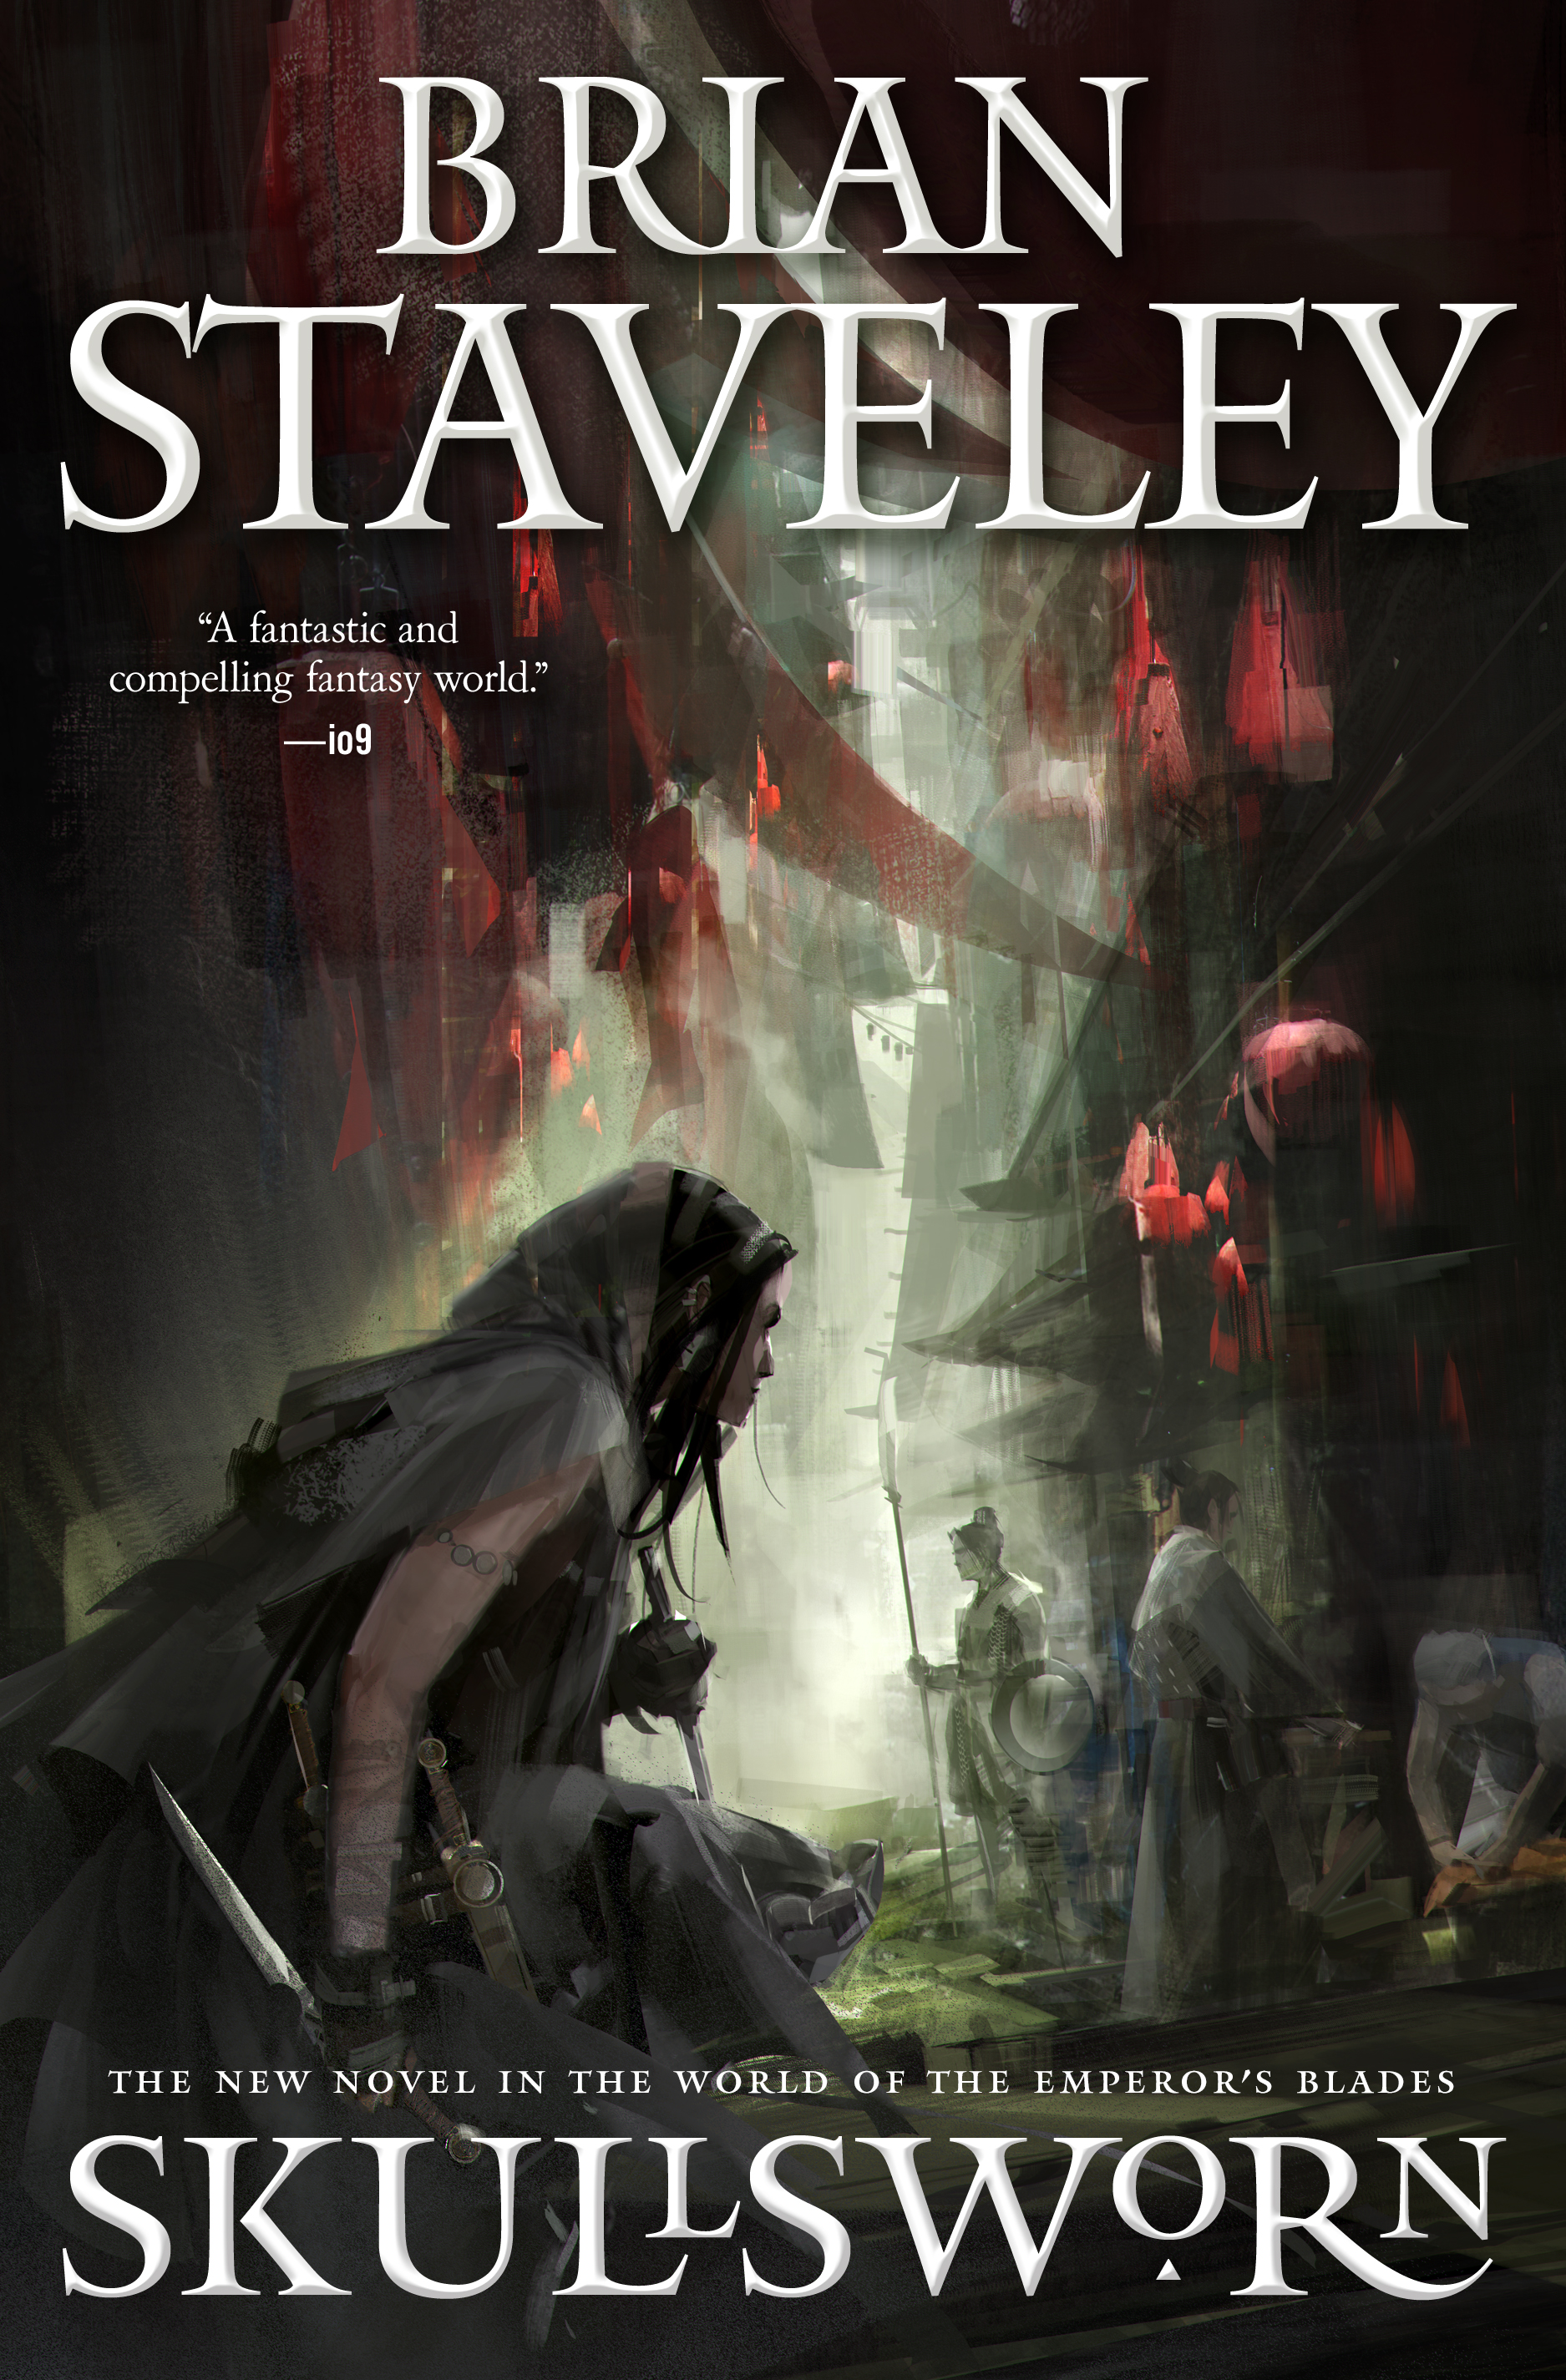 Skullsworn : A Novel in the World of The Emperor's Blades by Brian Staveley